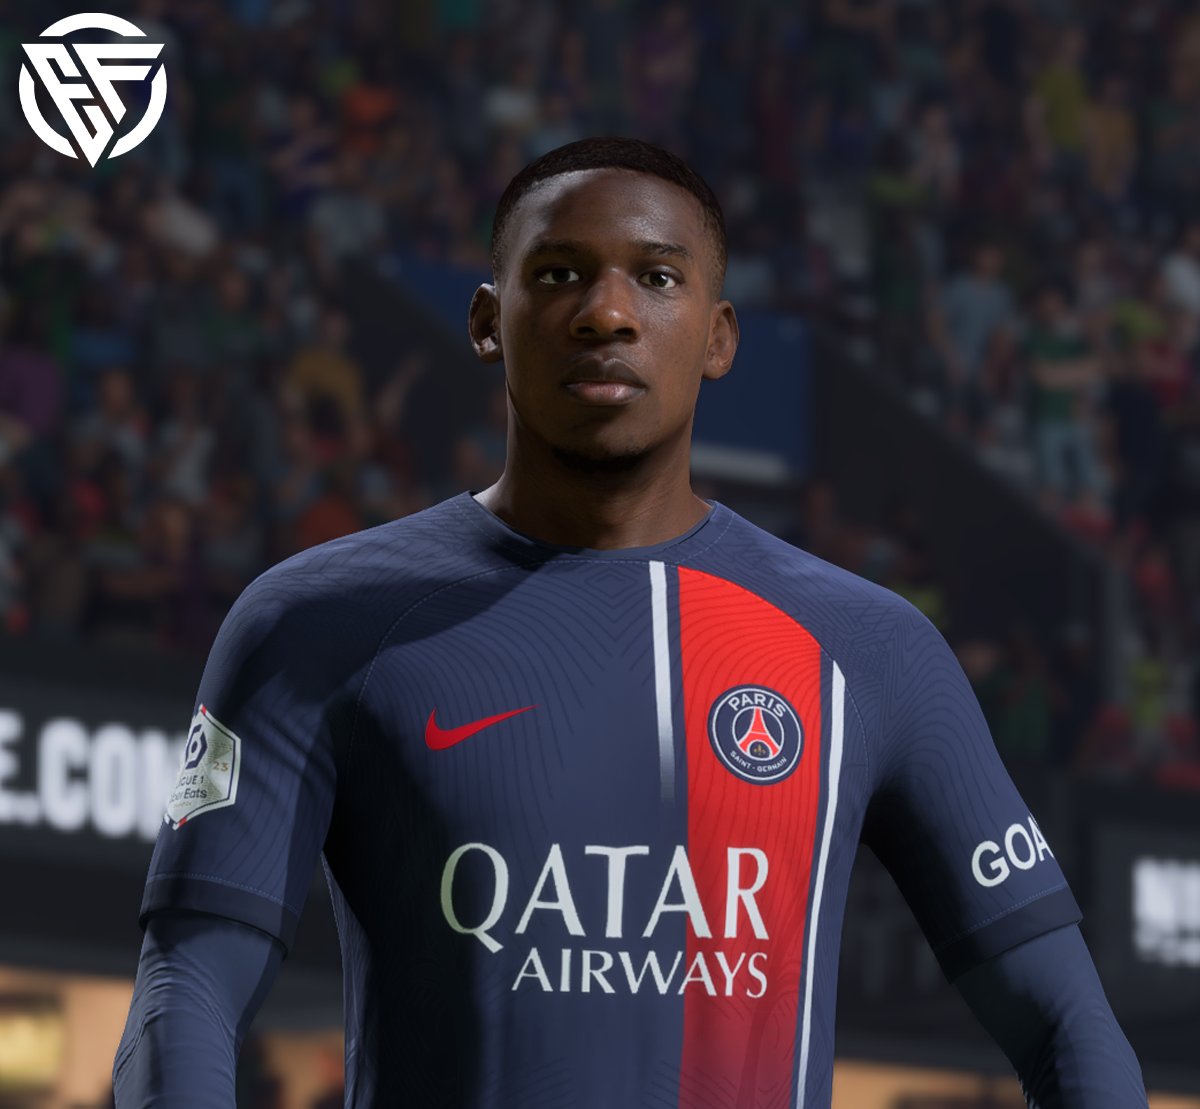 [FC 24] Nordi Mukiele - Face Update !
@PSG_inside Player

79 OVR > 81 POT 🔥

Get it now for FREE :
buymeacoffee.com/eyzordfaces/e/…

#PSG #FC24 #FCMods #fifafaces #FifaMods